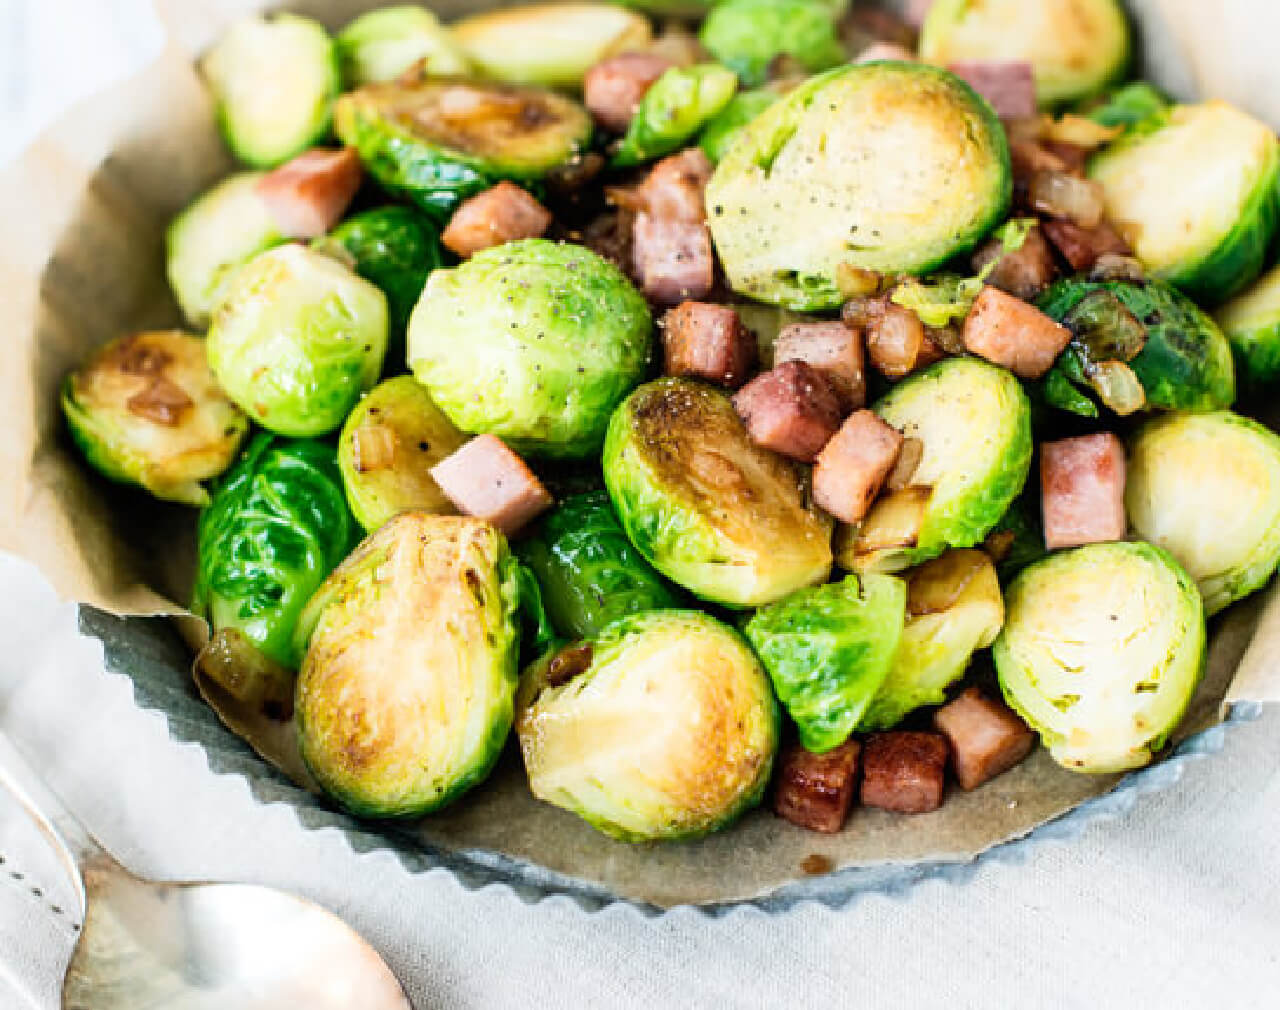 Stir-fried Brussel Sprouts and Ham